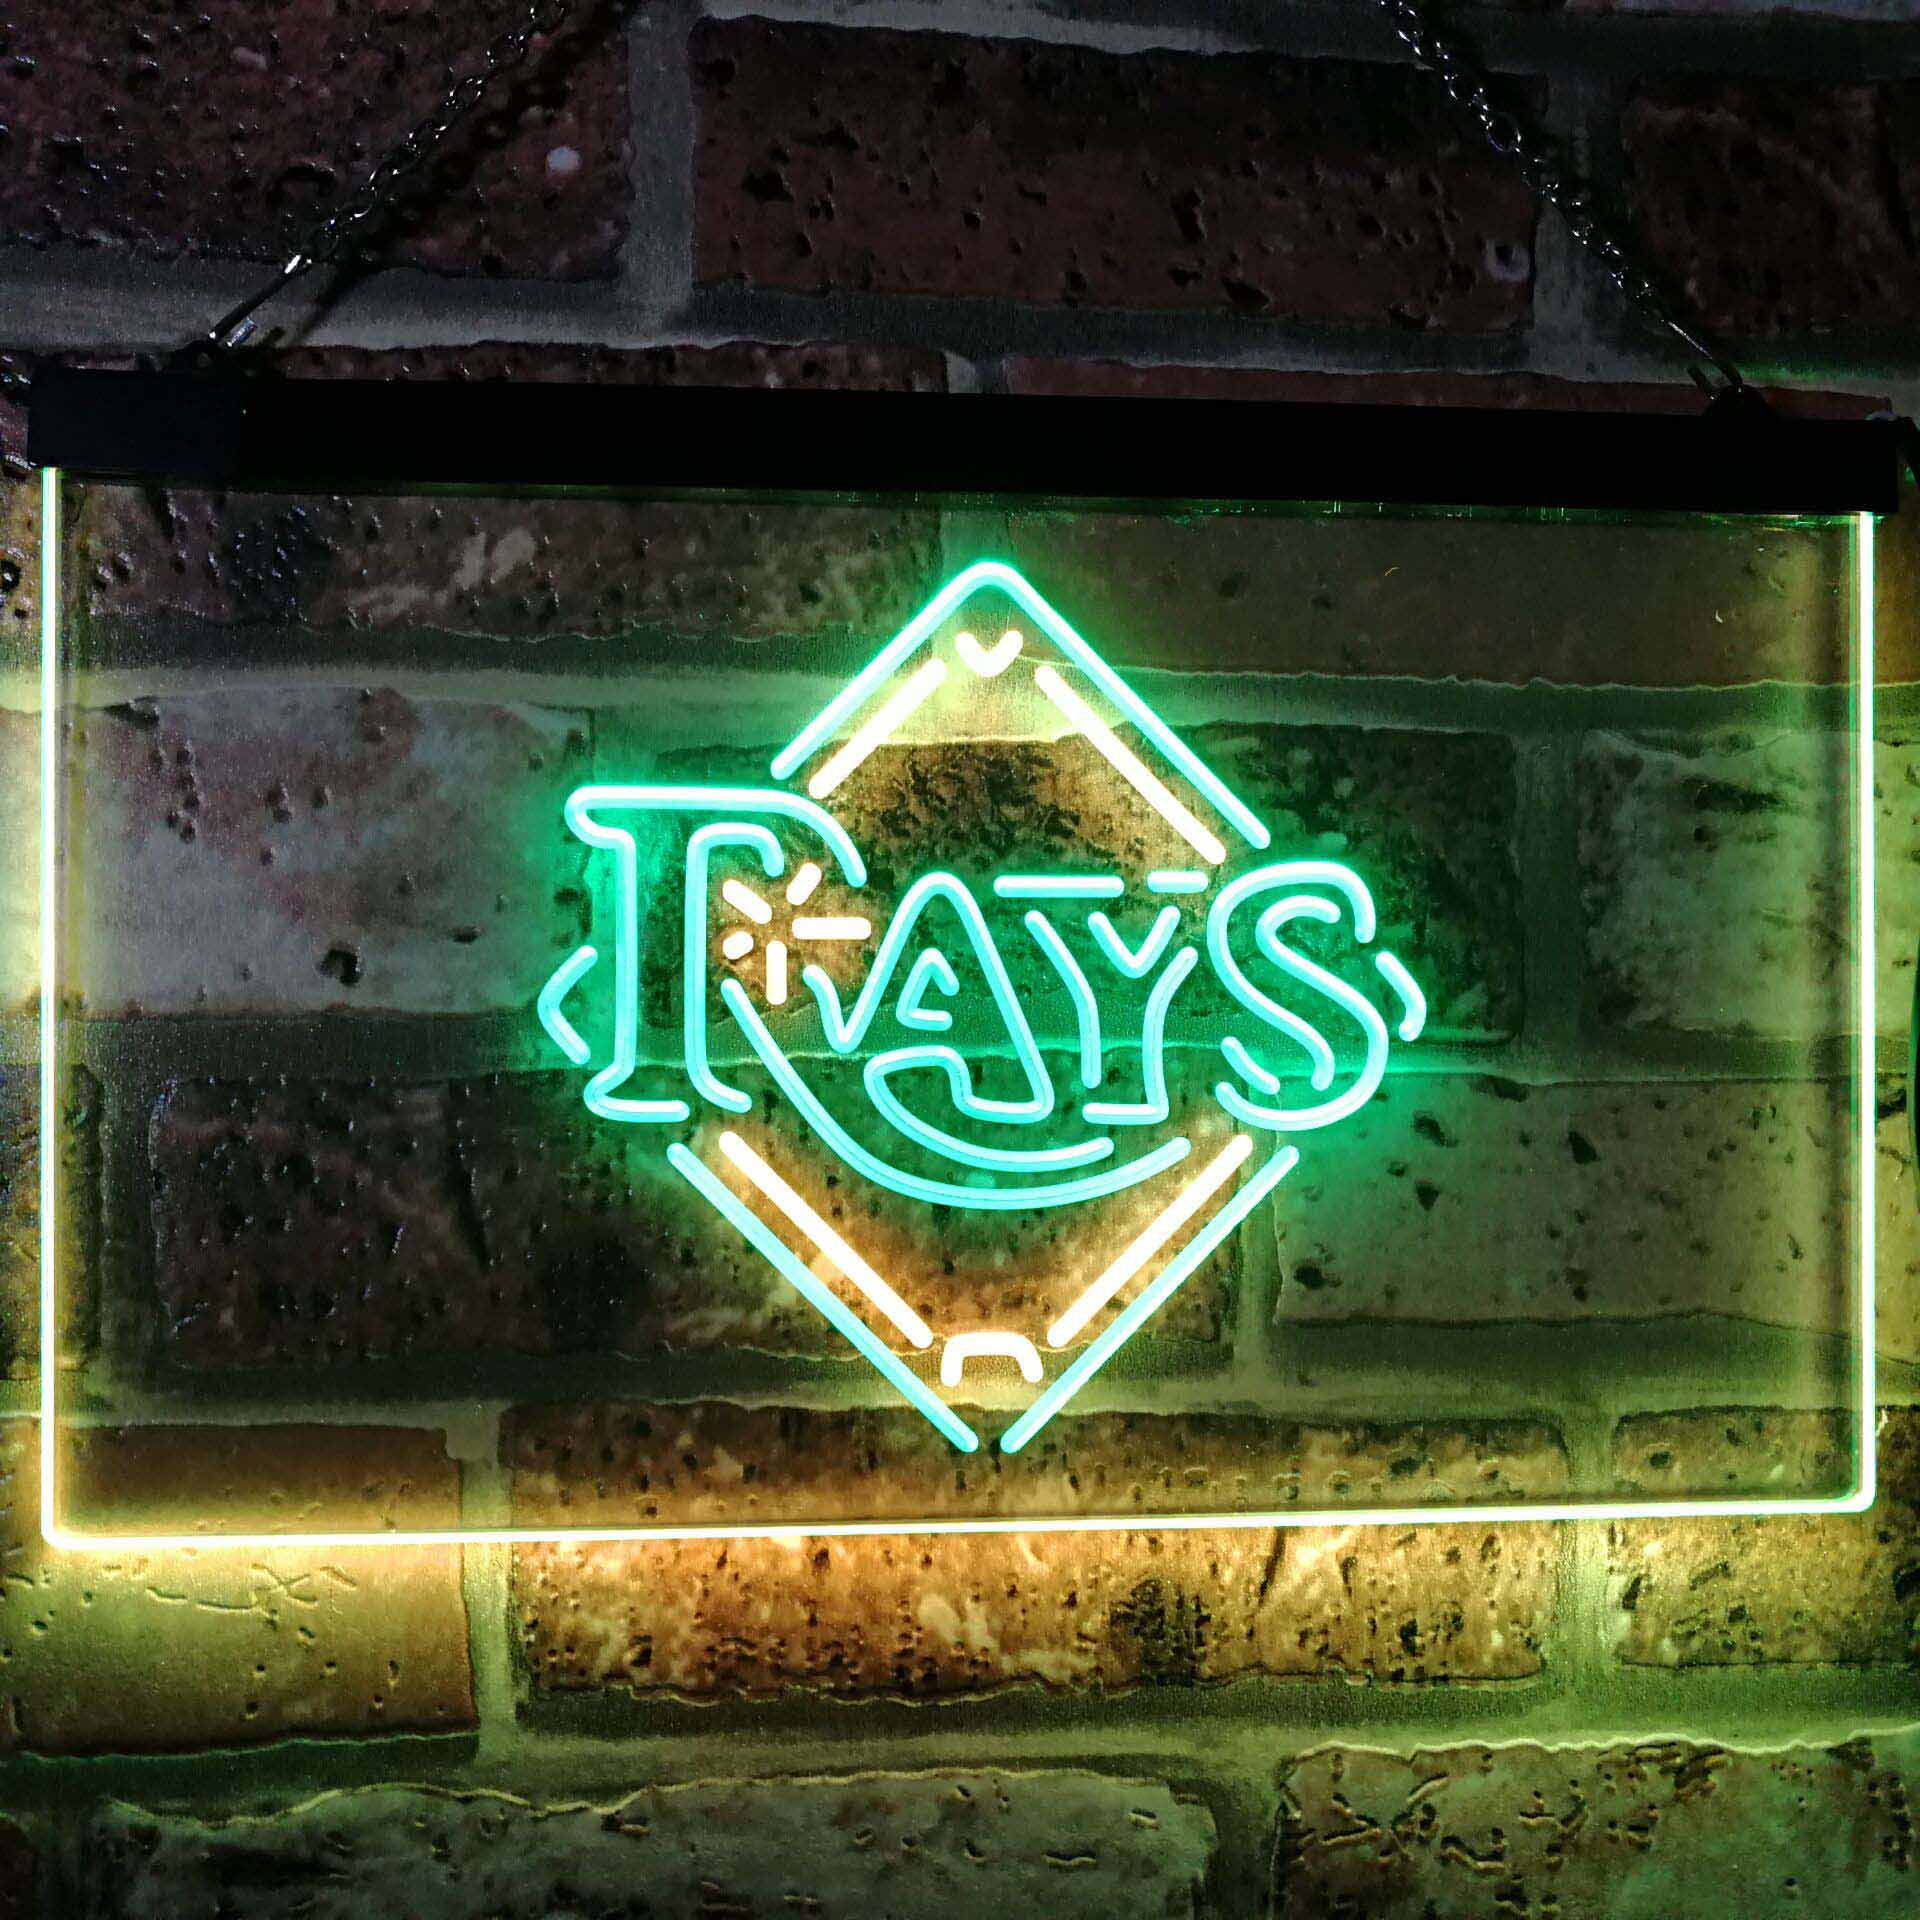 Tampa Bay Rays LED Neon Sign